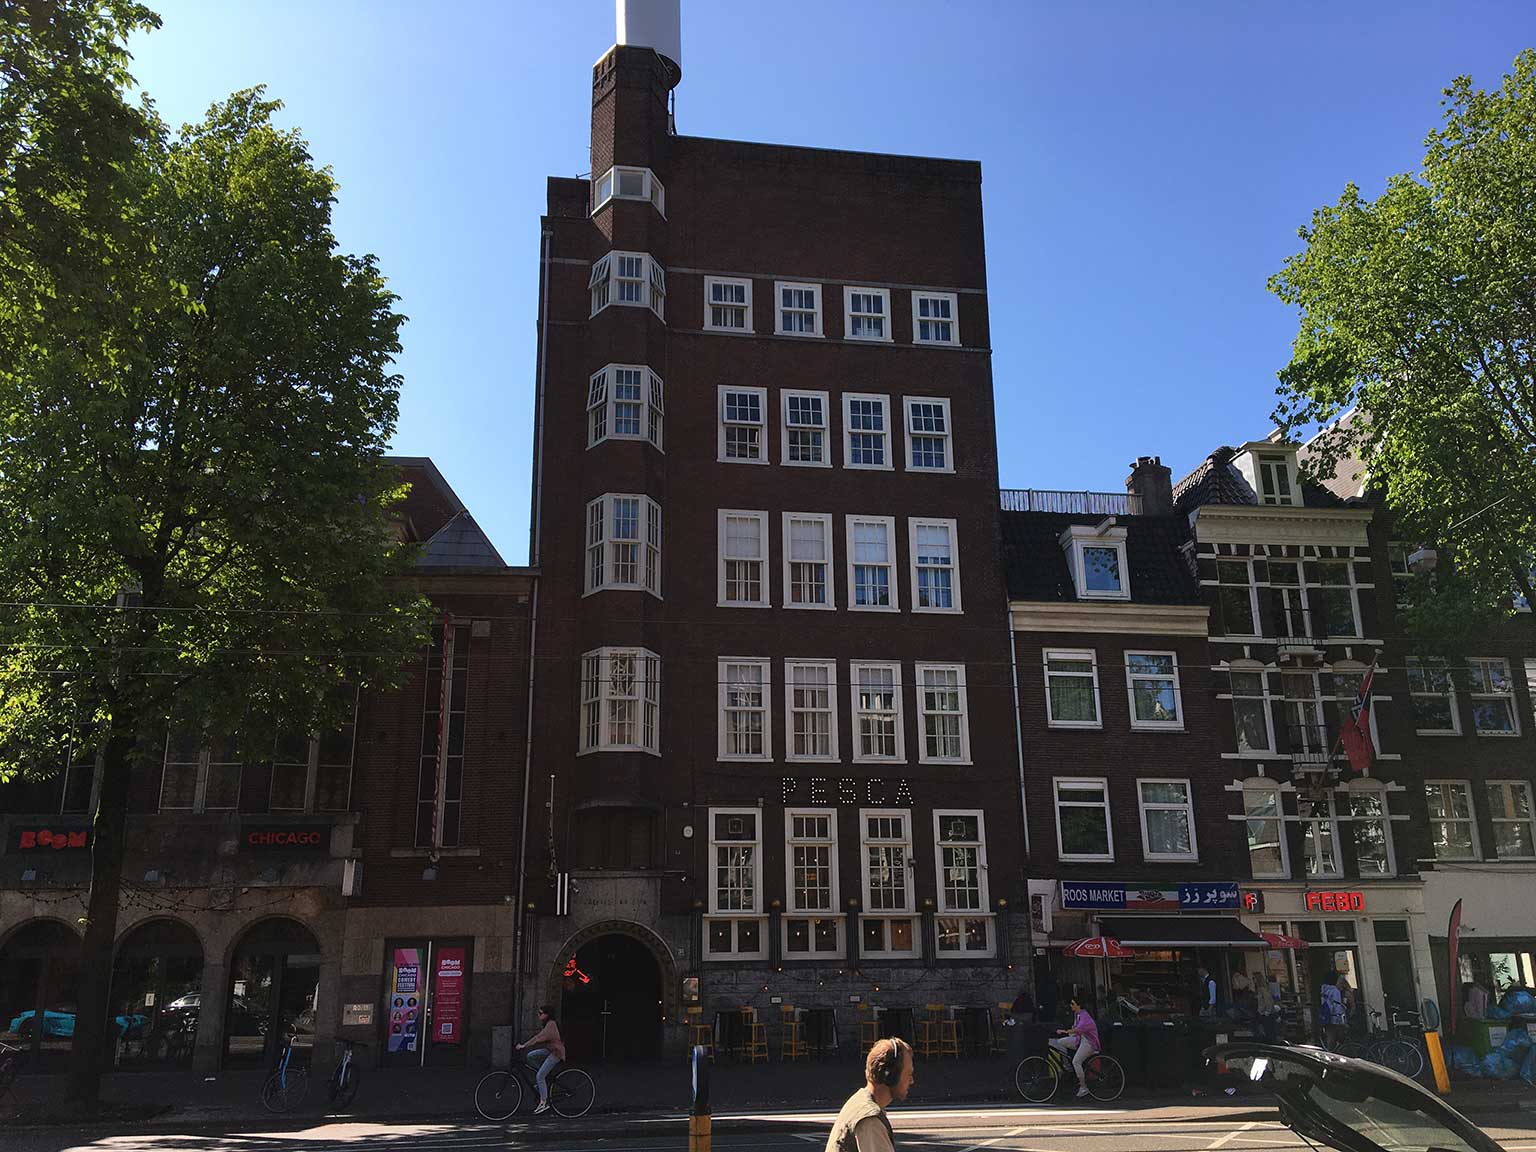 The Roothaanhuis at Rozengracht 133, Amsterdam